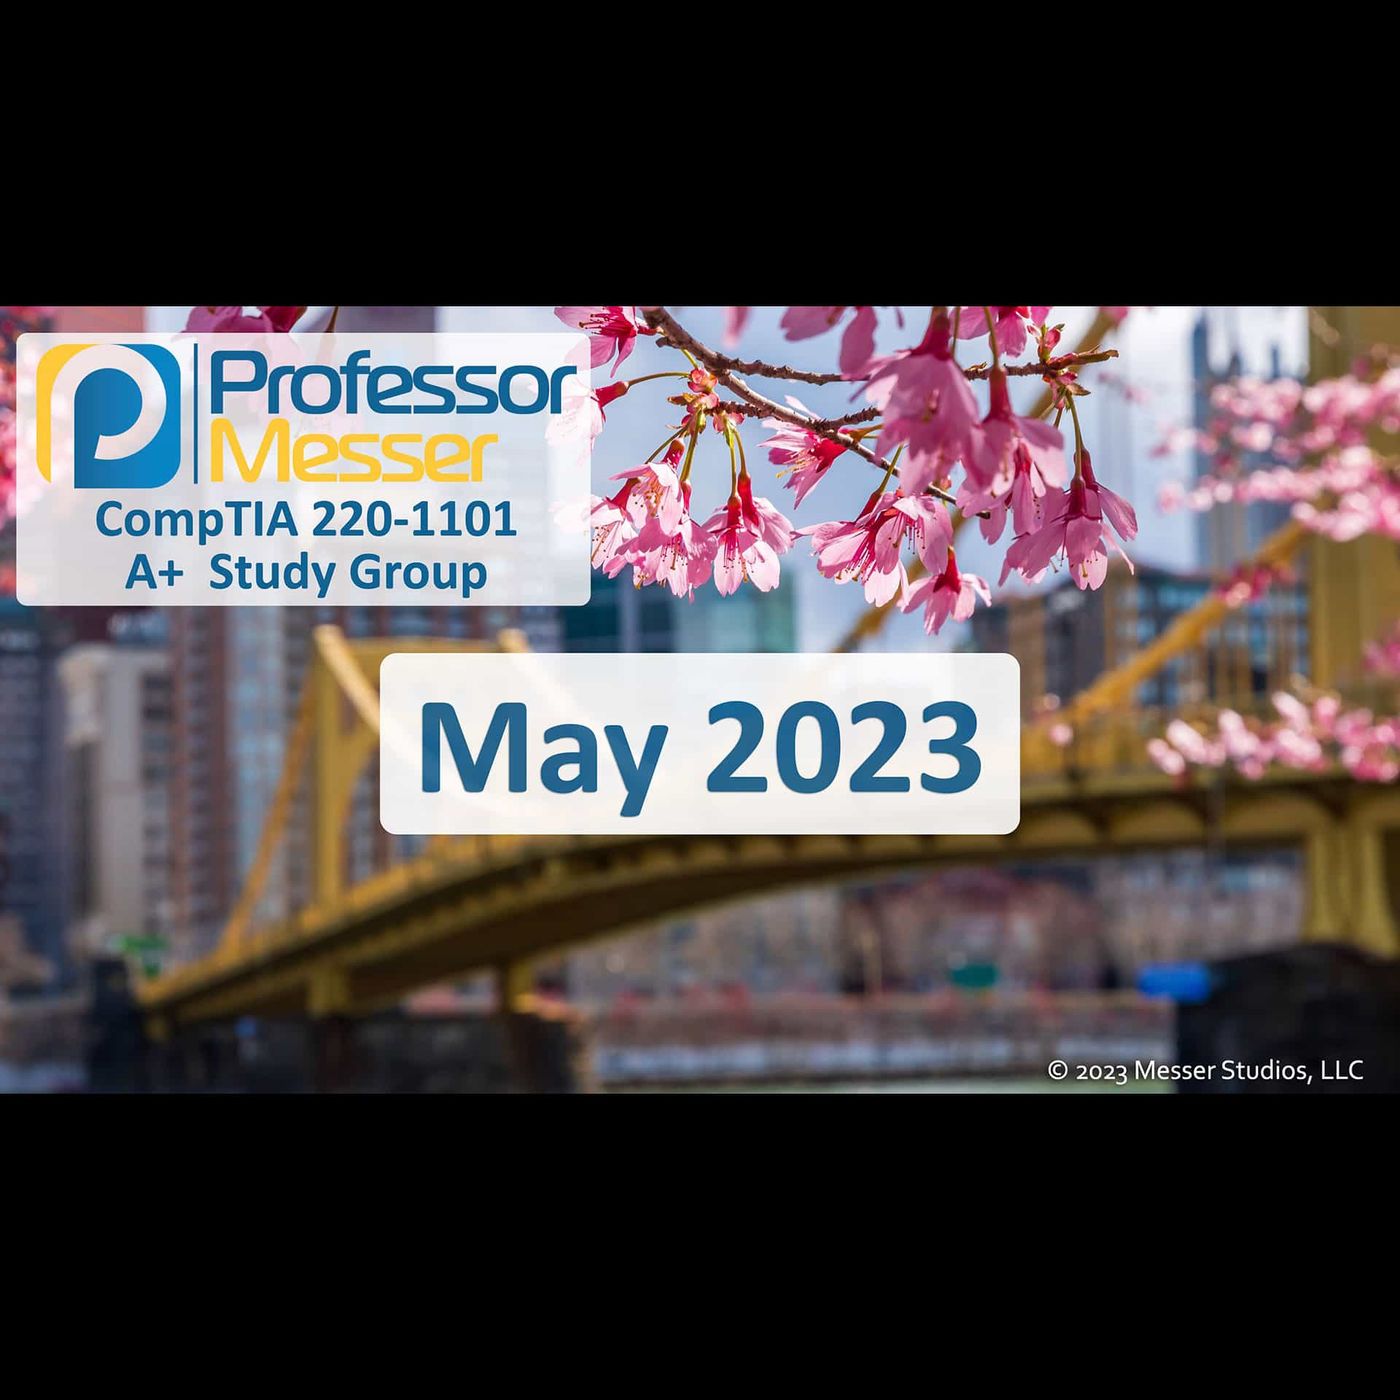 Professor Messer's CompTIA 220-1101 A+ Study Group - May 2023